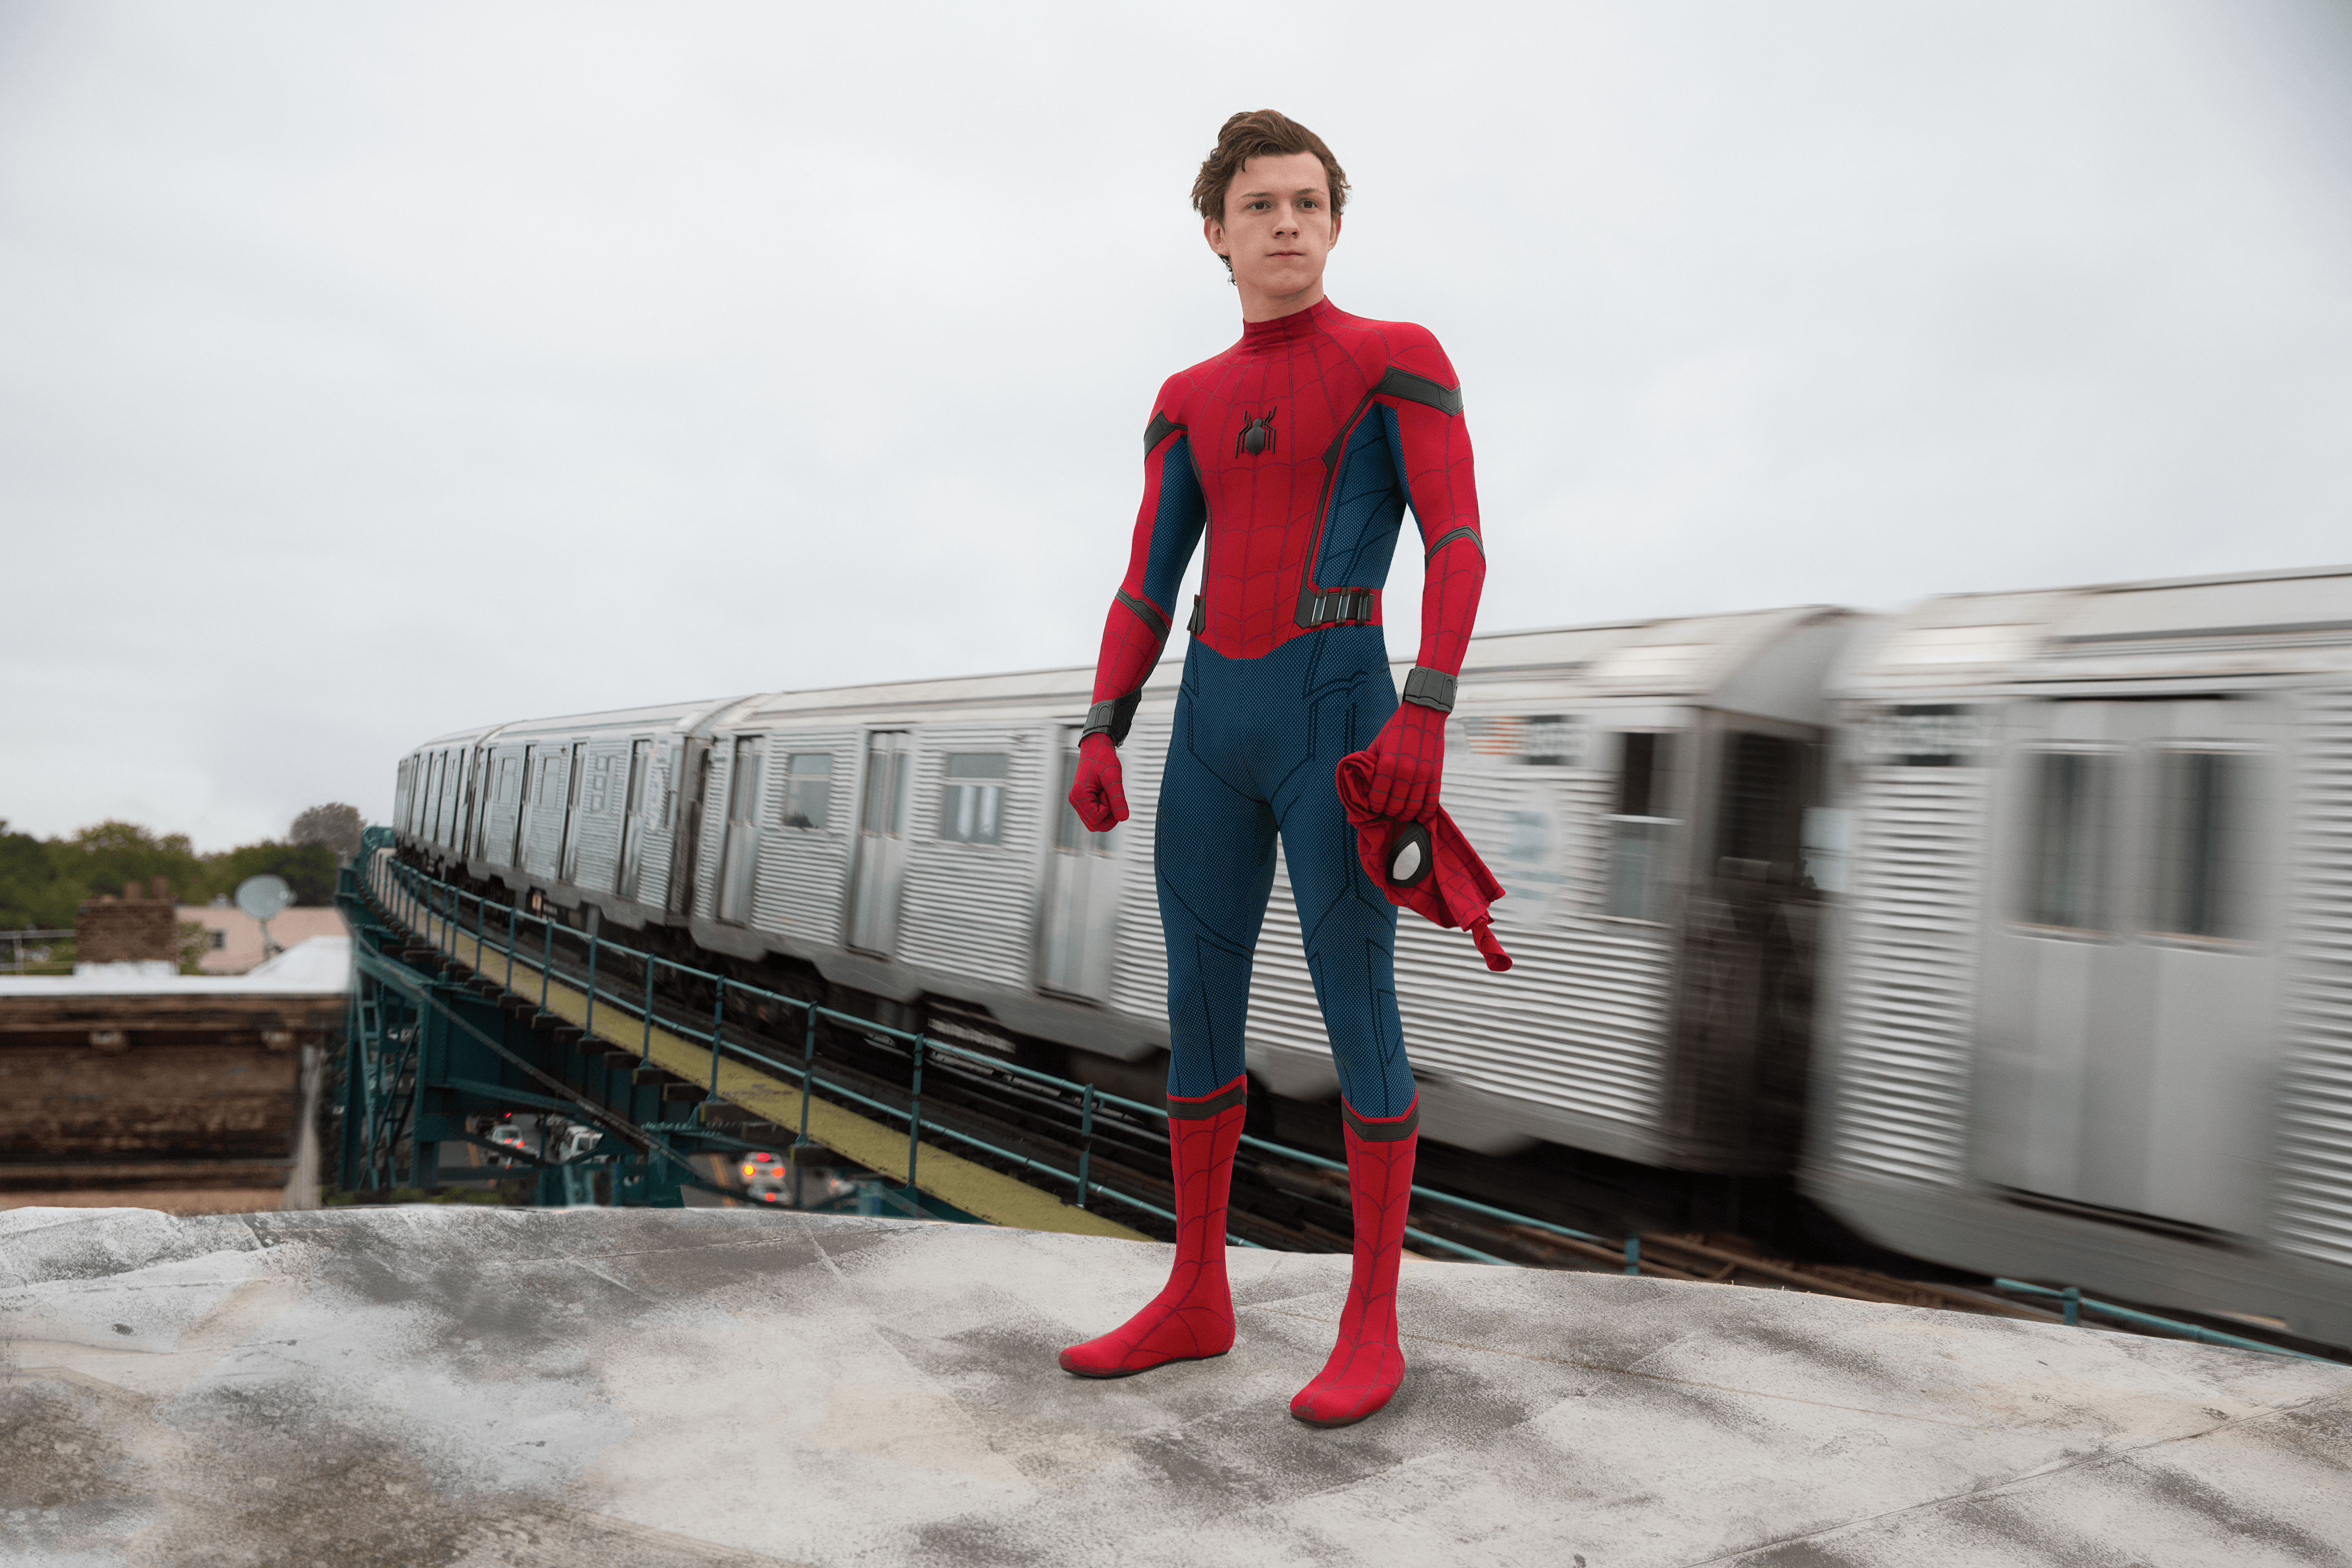 Spiderman Homecoming Ad Wallpapers